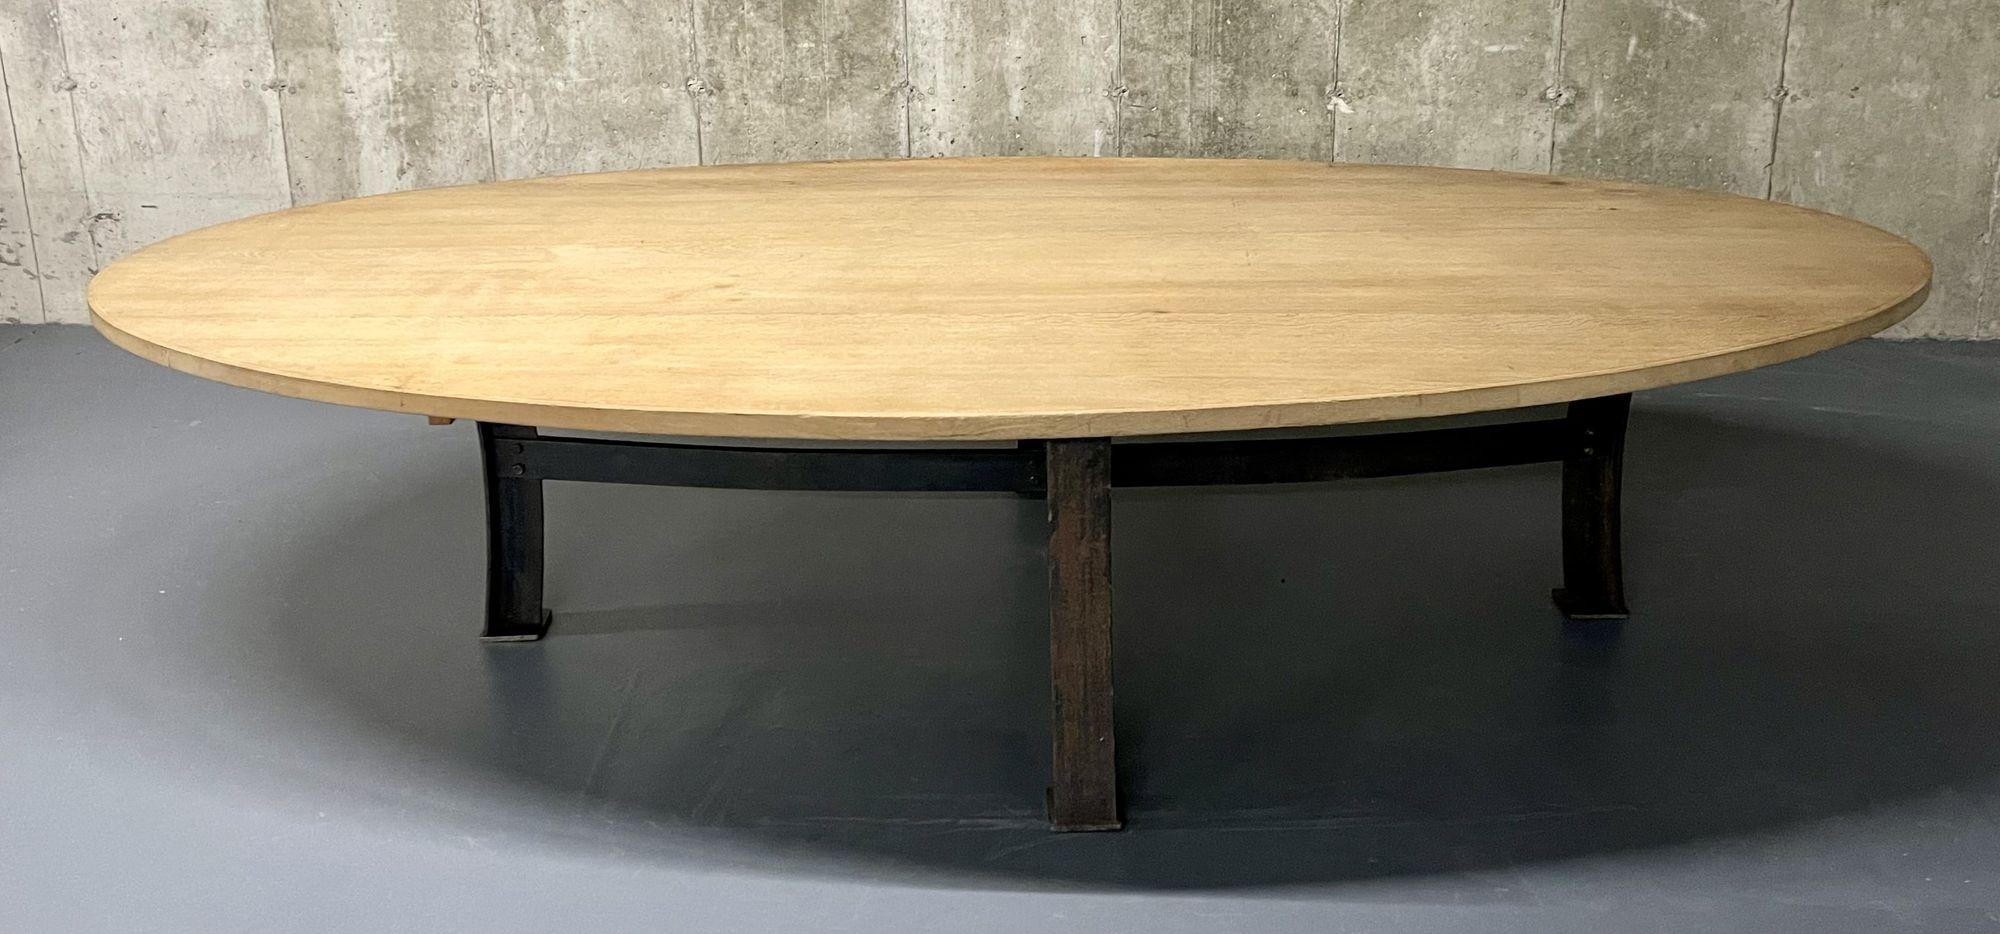 Mid Century Monumental Industrial Dining, Conference Table, Oak, Steel, American For Sale 6